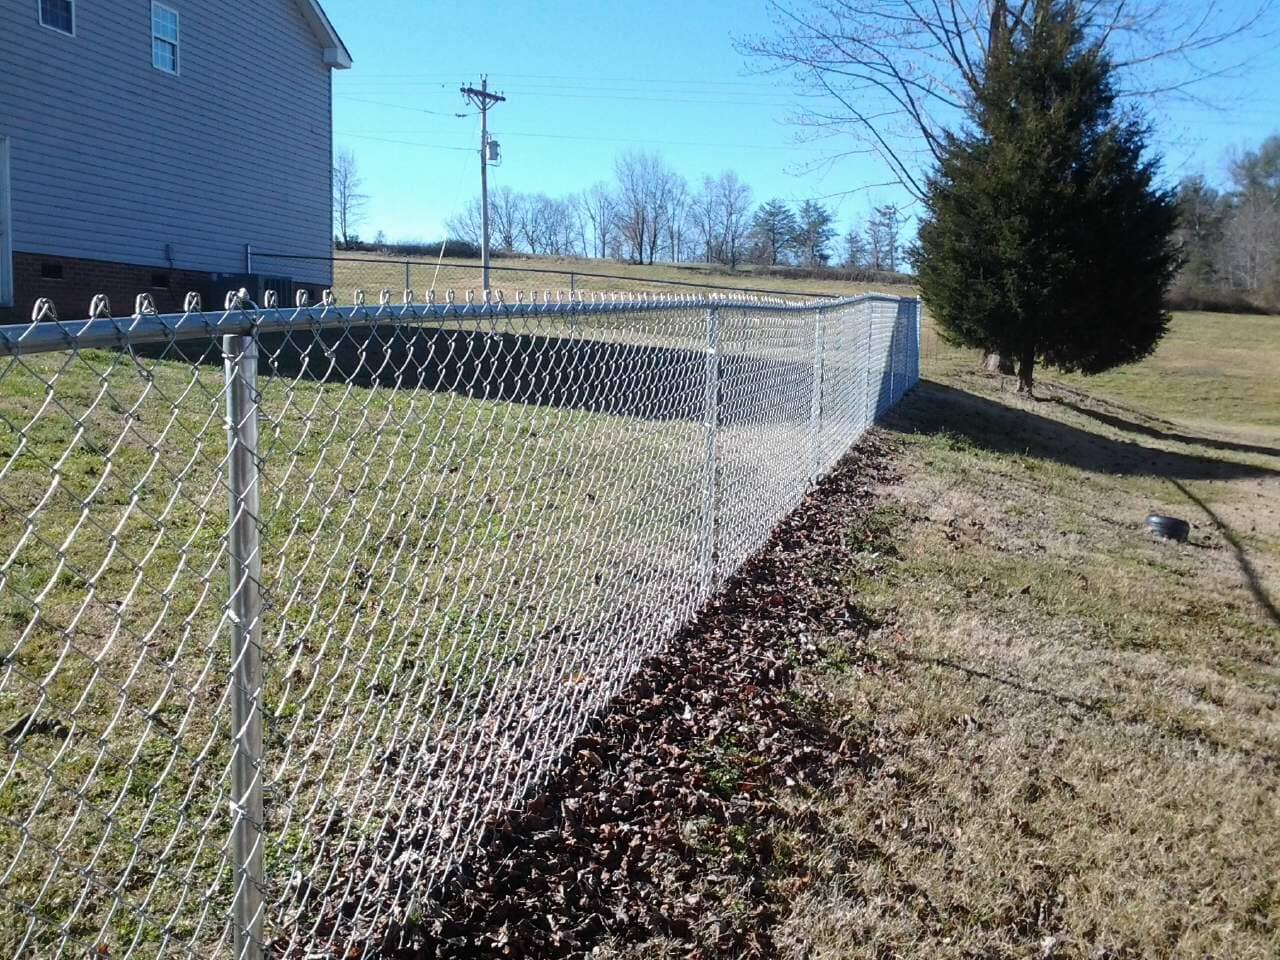 Fister Fence of Hickory, LLC Photo